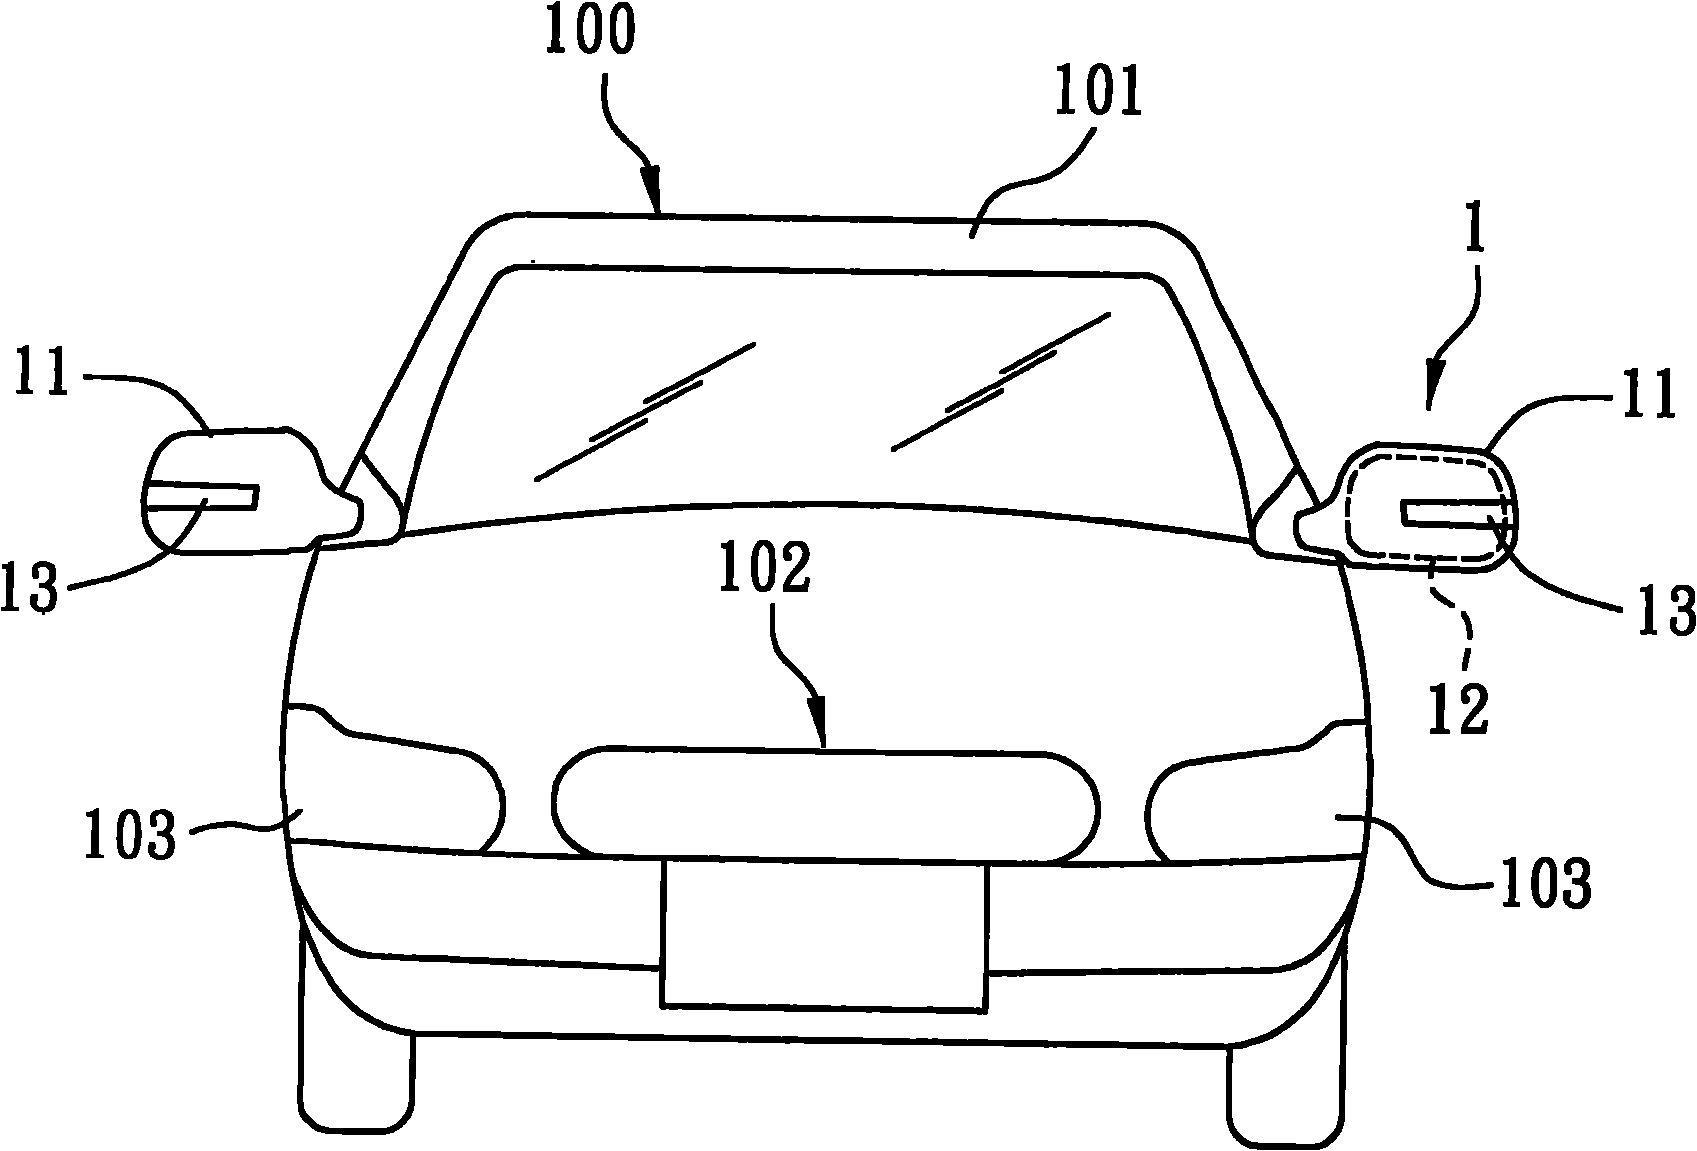 Rearview mirror device with illumination function